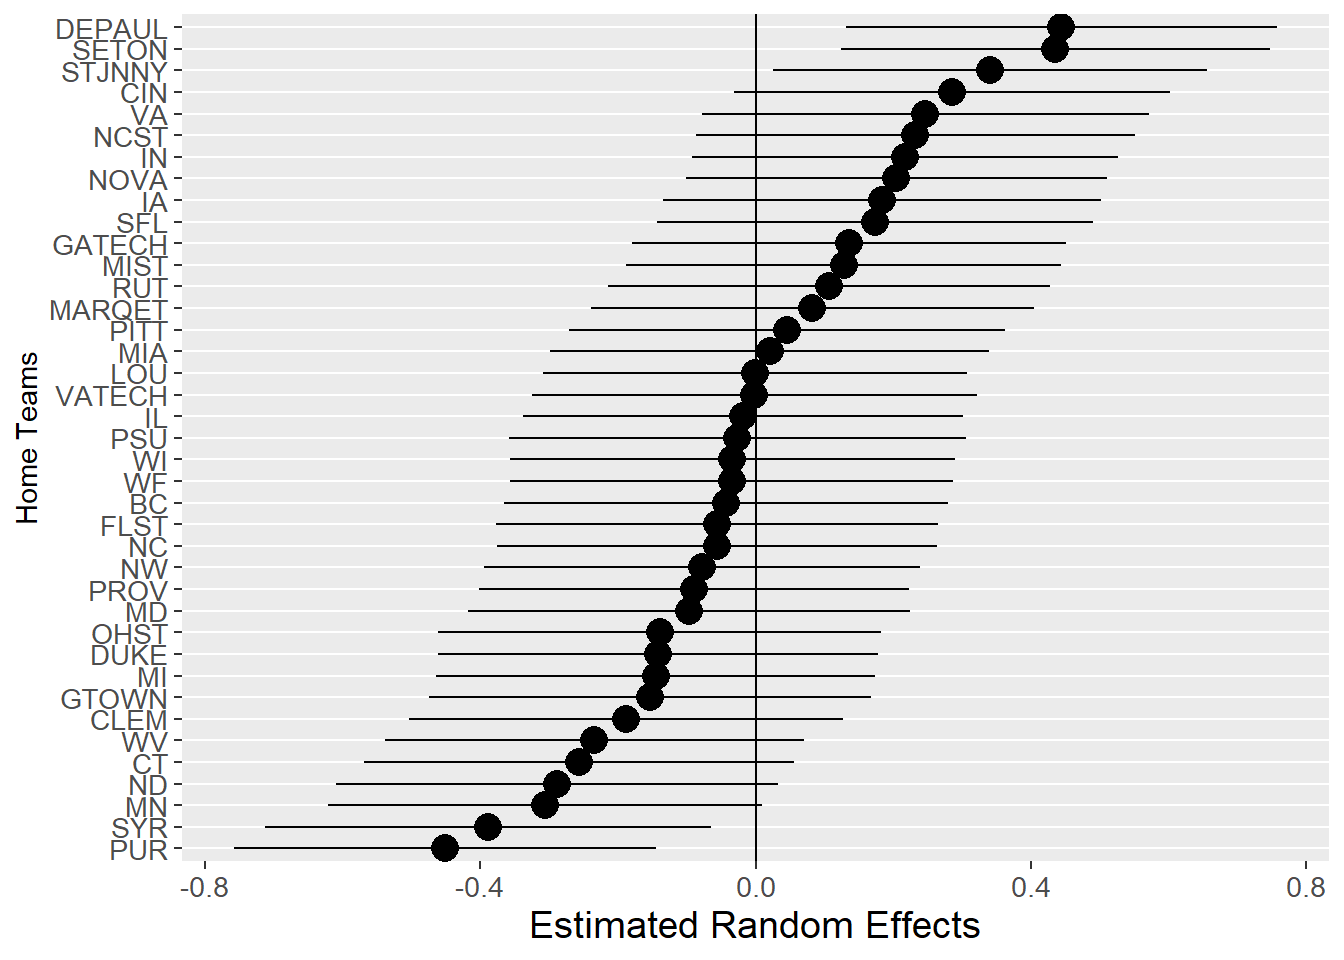 Estimated random effects and associated prediction intervals for 39 home teams in Model F.